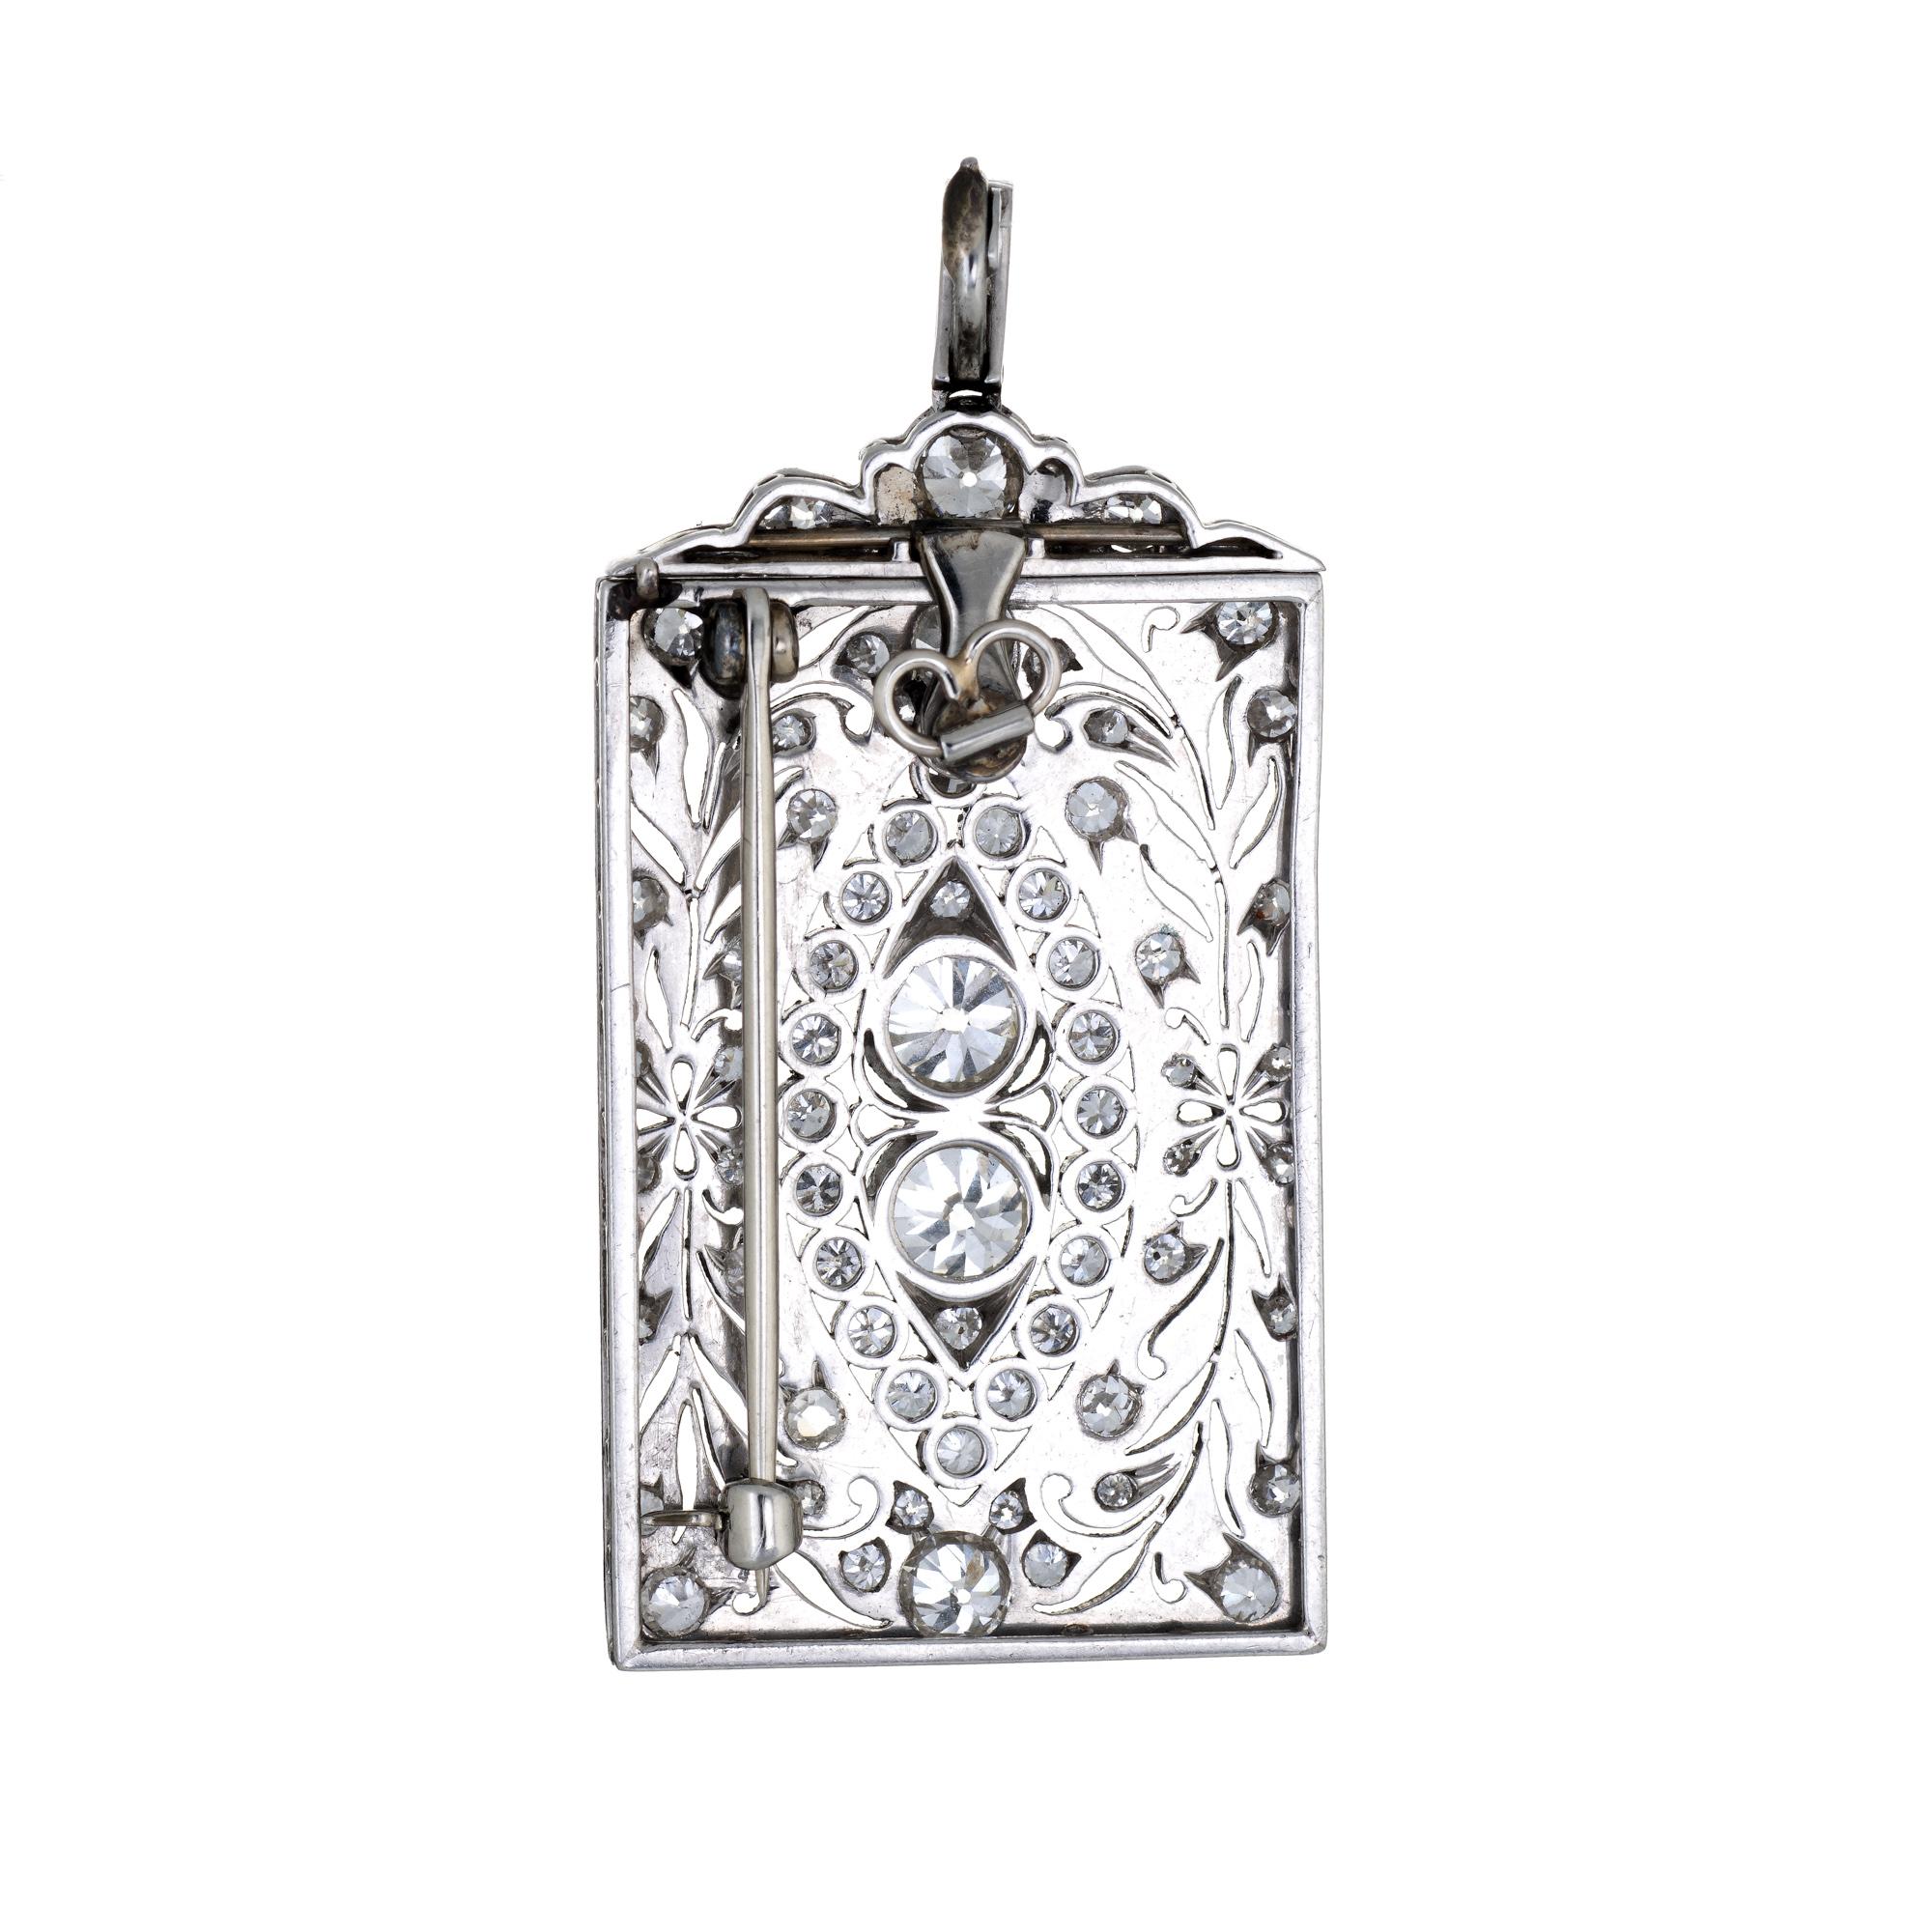 Finely detailed antique Edwardian pendant/brooch (circa 1900s to 1910s), crafted in 900 platinum. 

The pendant is set with old mine cut diamonds that total an estimated 3 carats. The larger center set diamonds are estimated at 0.75 carats each. The